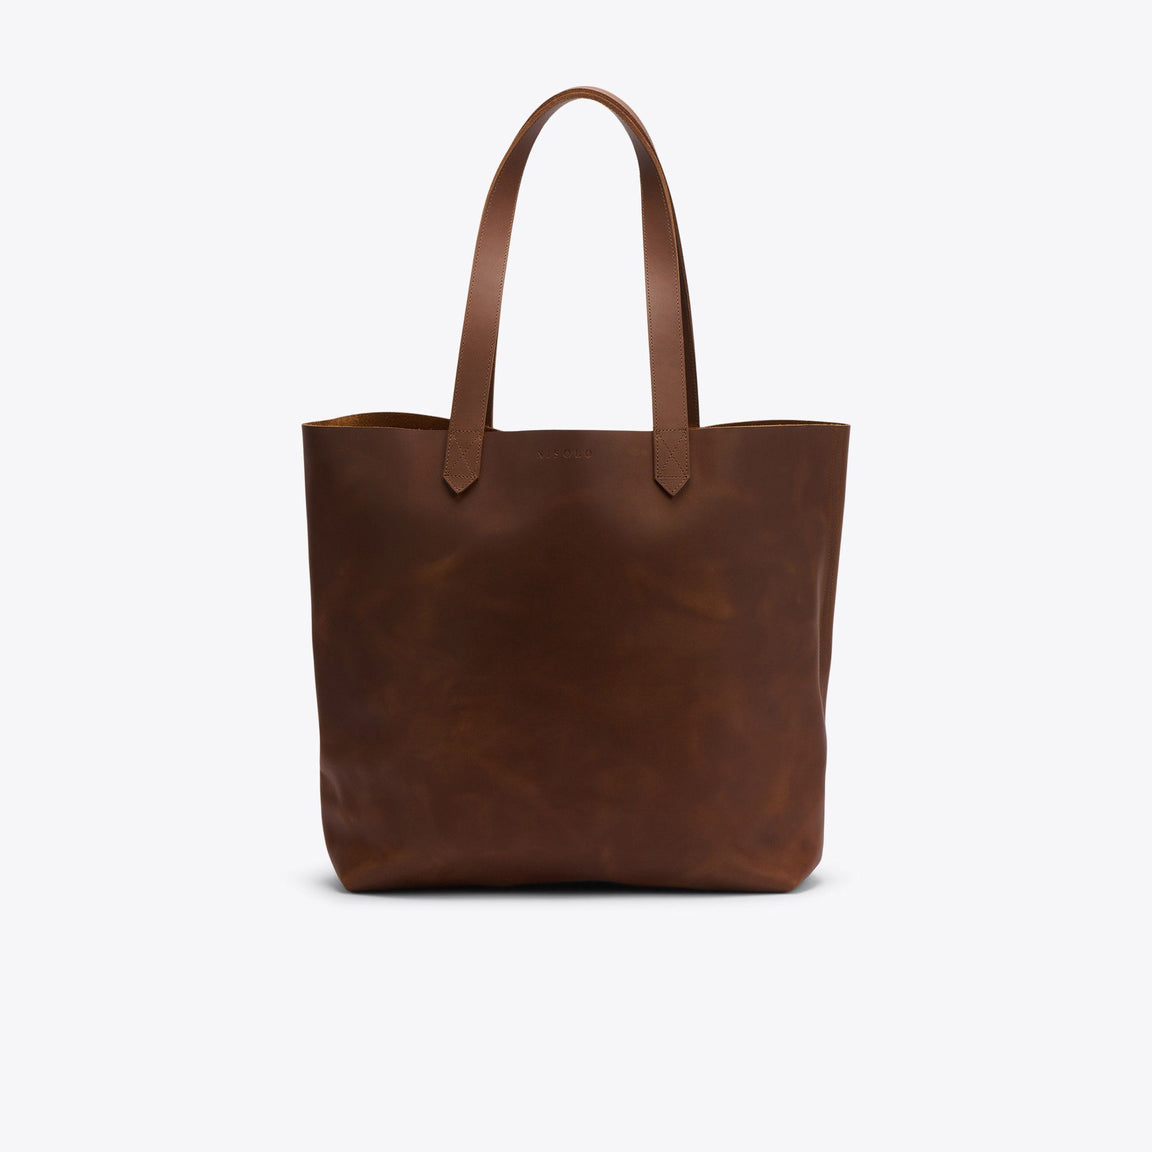 Women's Bags & Totes | Handmade Leather Totes | Nisolo